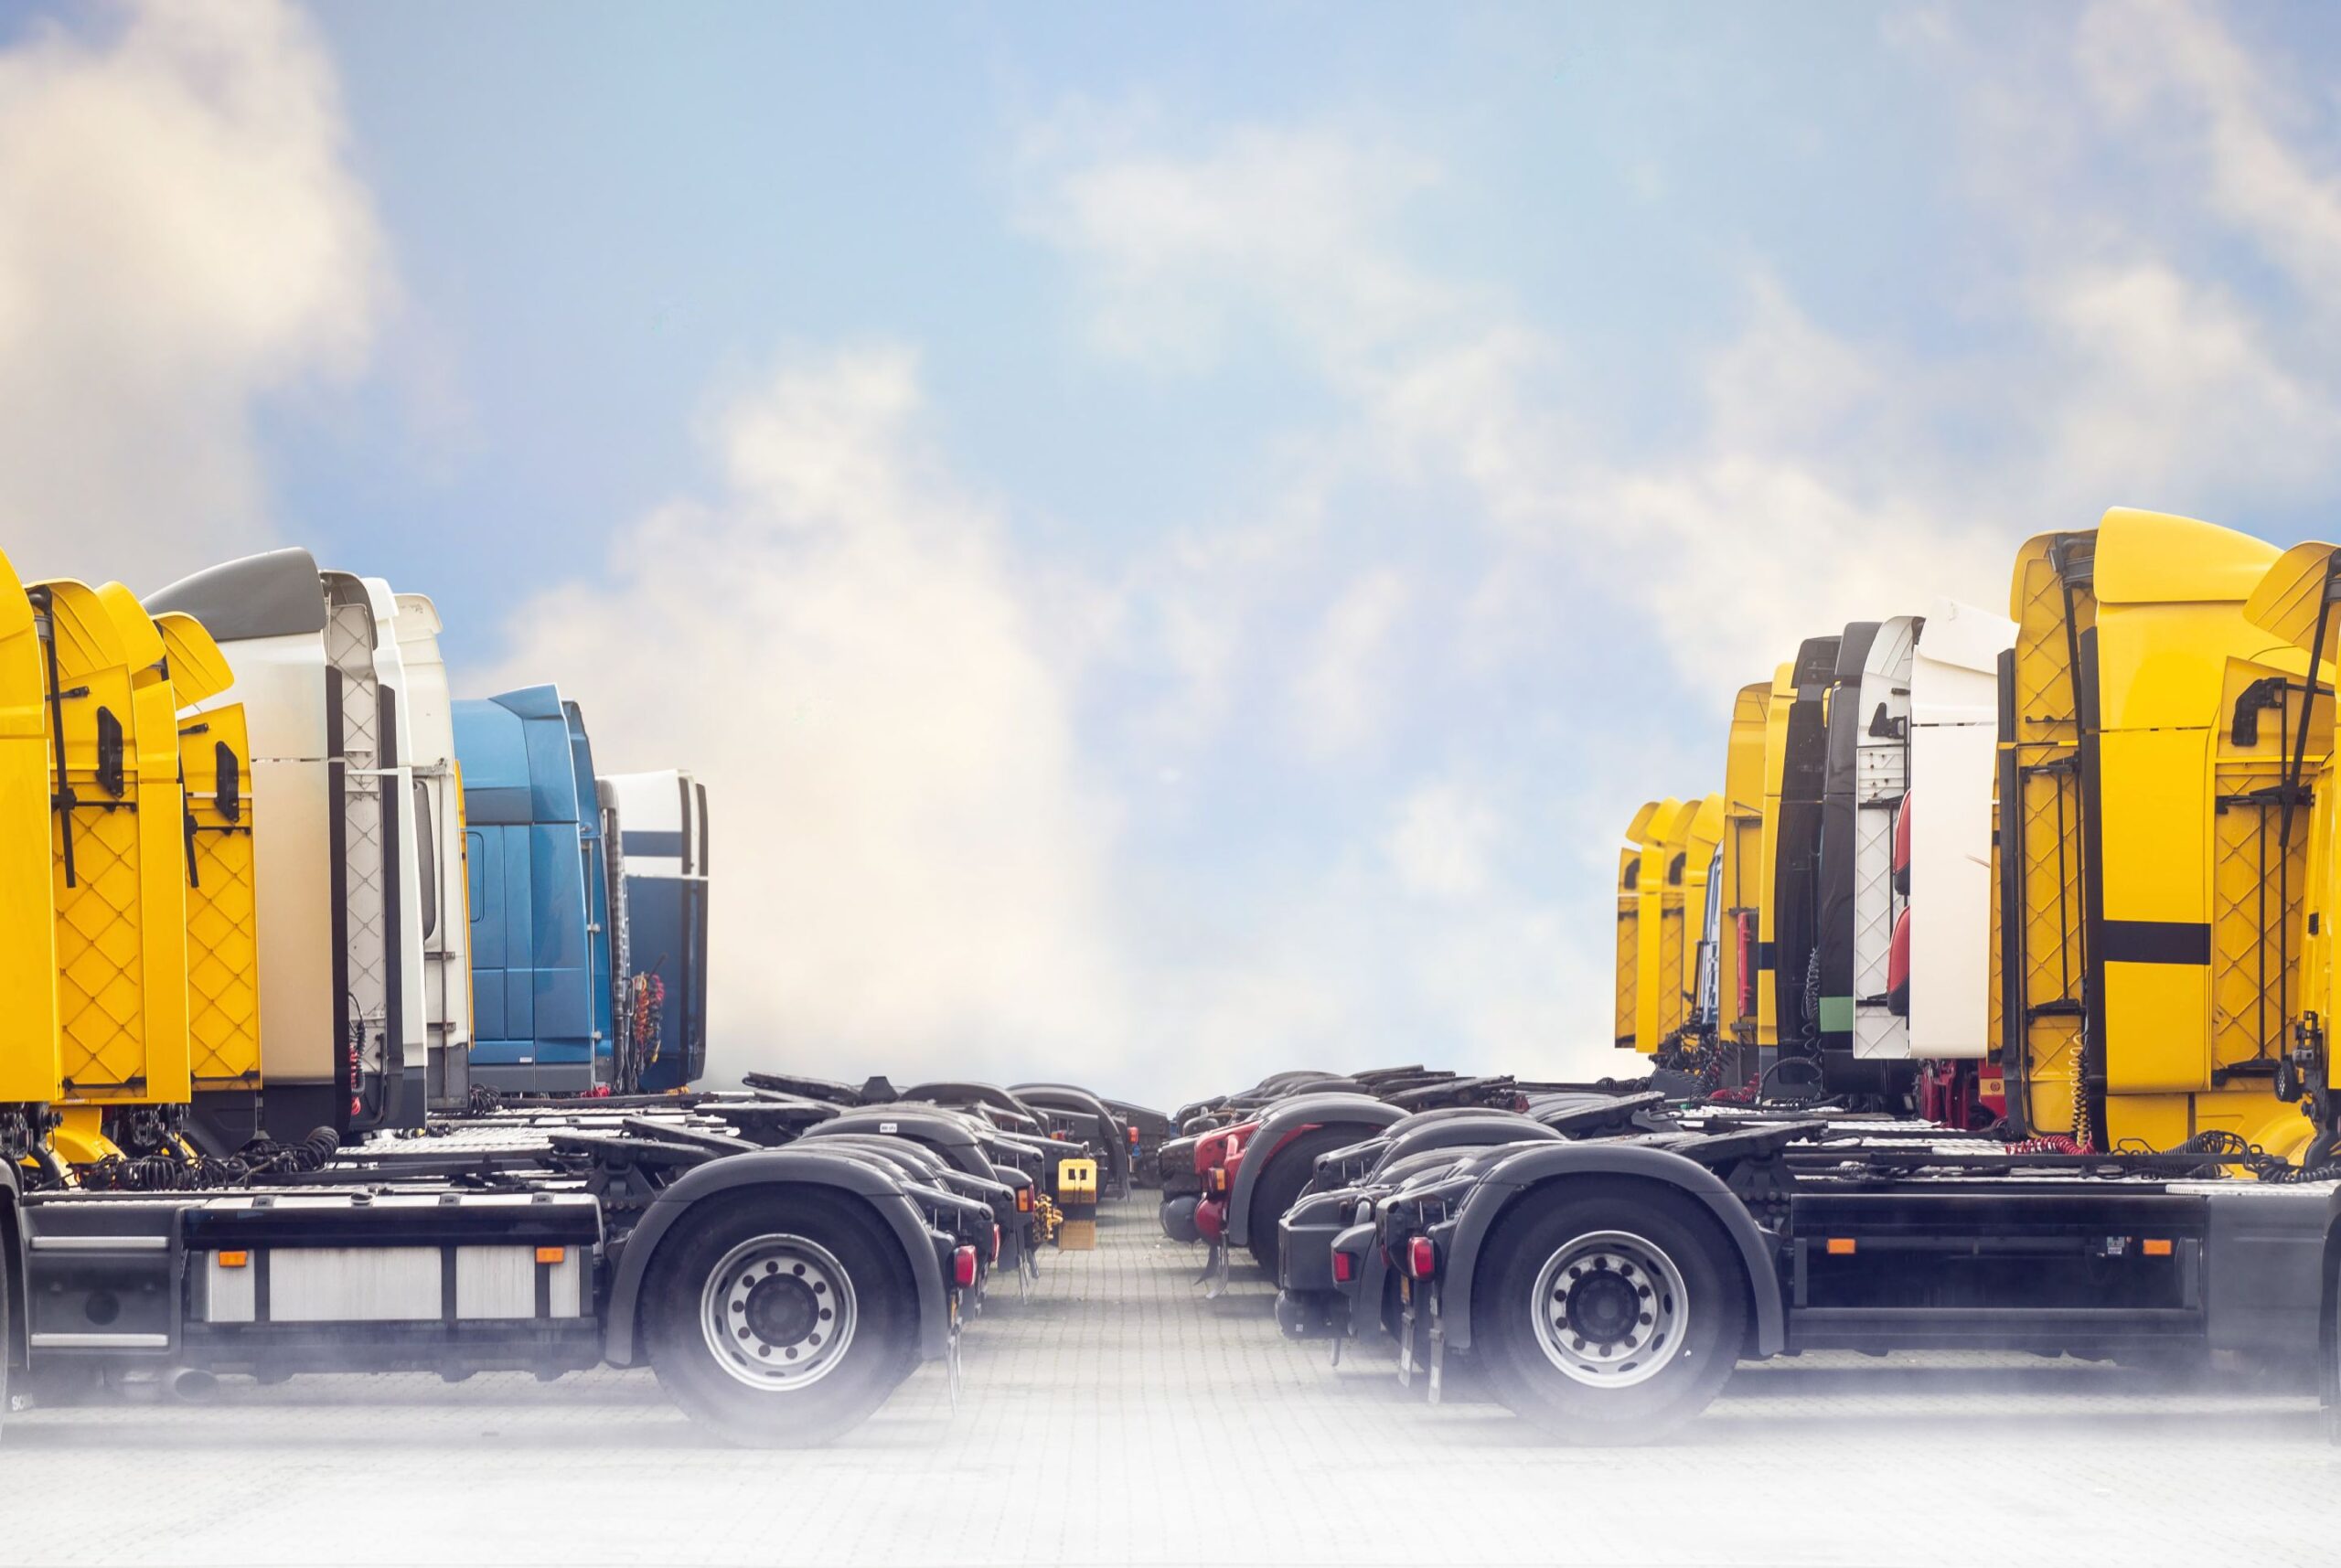 trucks lined up ready to be financed in Sydney Australia